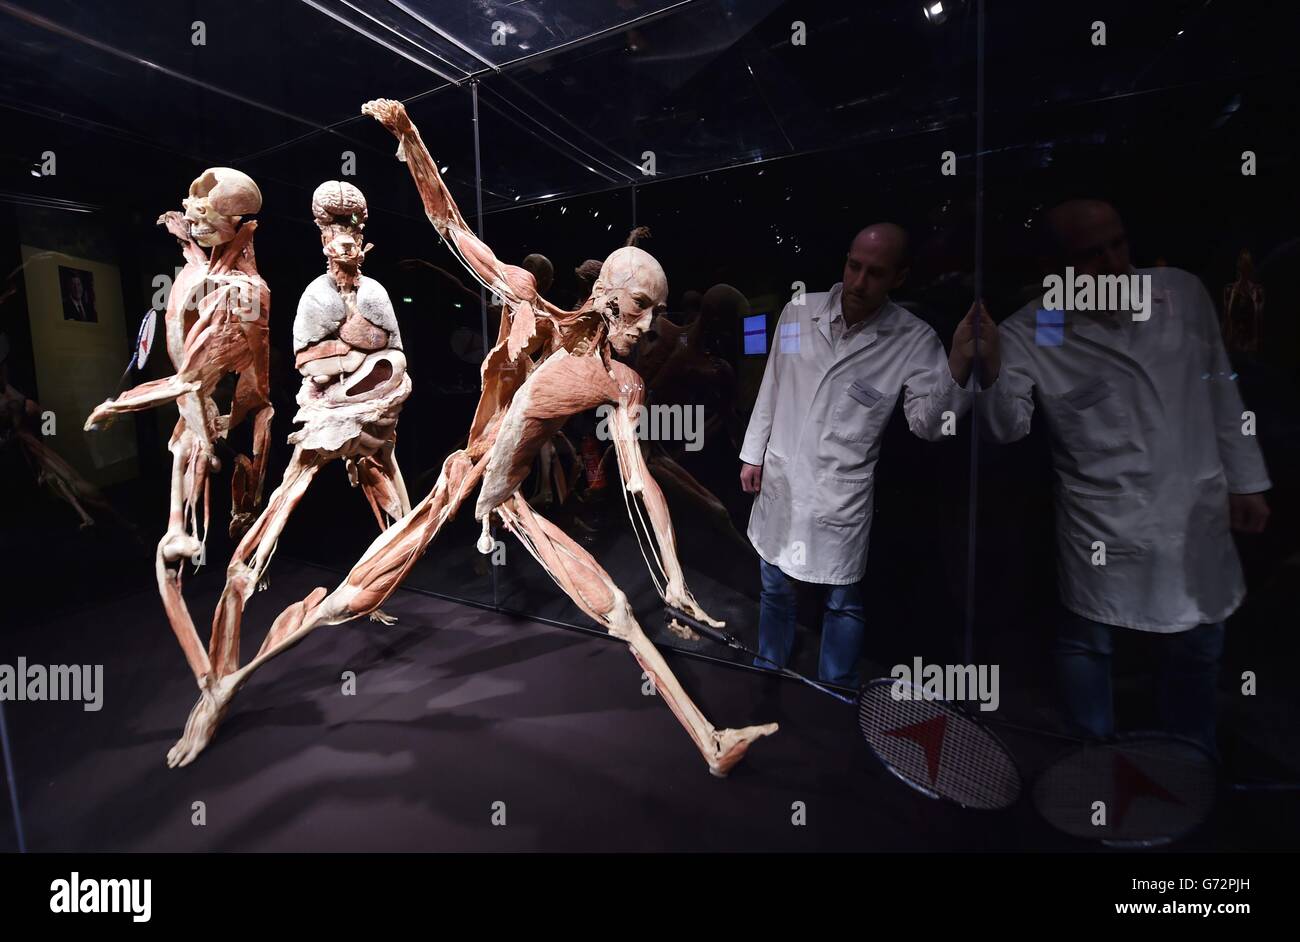 The display called The Badmintion Player at the Body Worlds Vital world-famous exhibition exploring the wonders of the human body, on show in the UK for the first time at the Centre for Life in Newcastle. Stock Photo